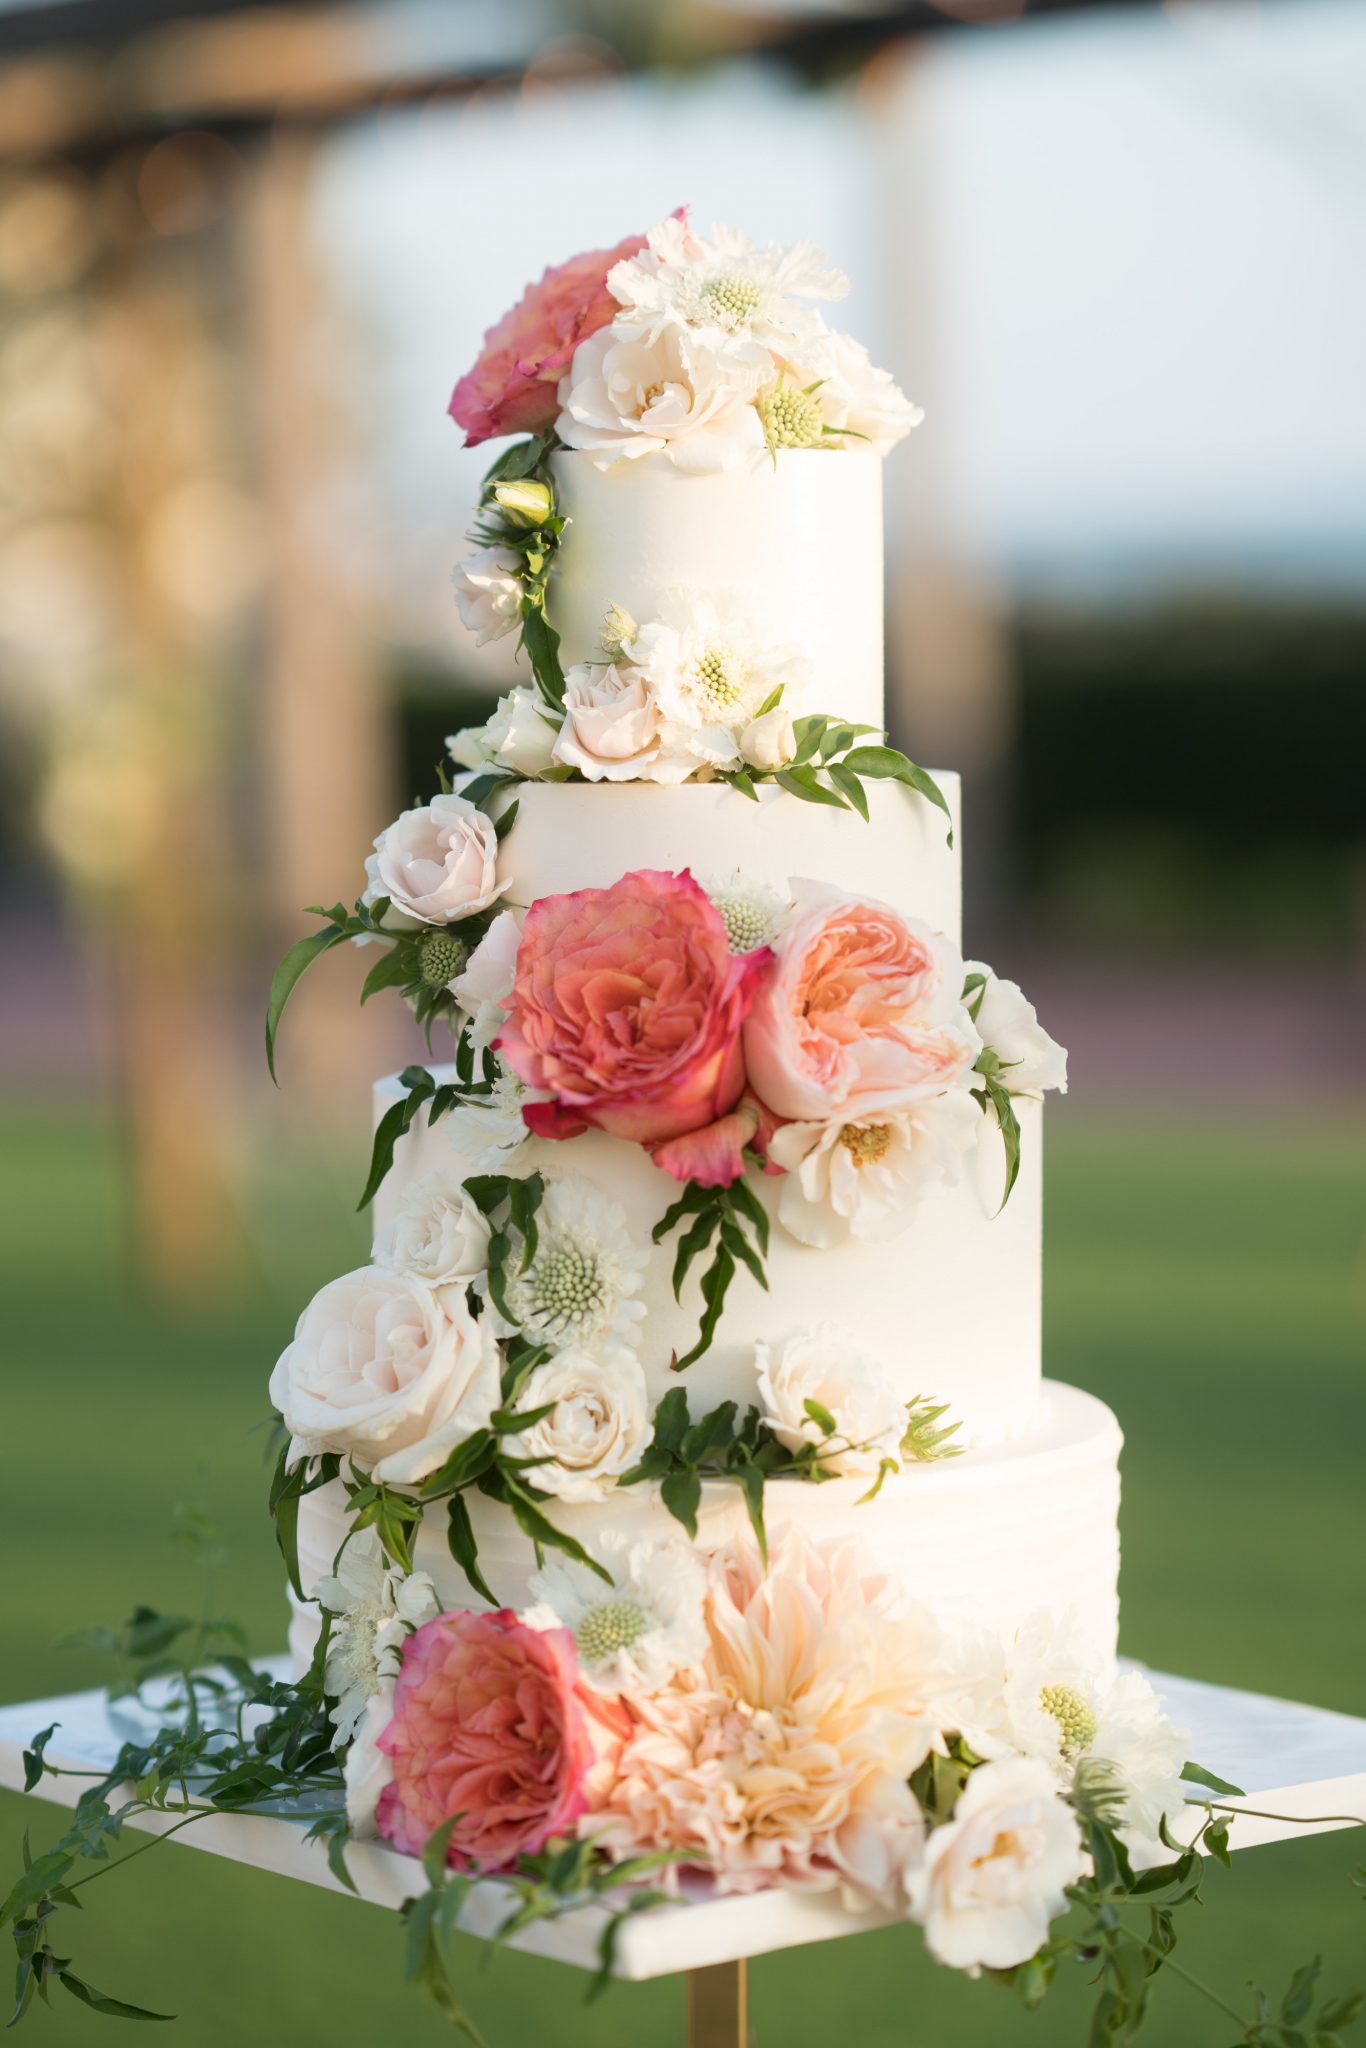 Amazing tiered wedding cake created by Organic Elements with flowers